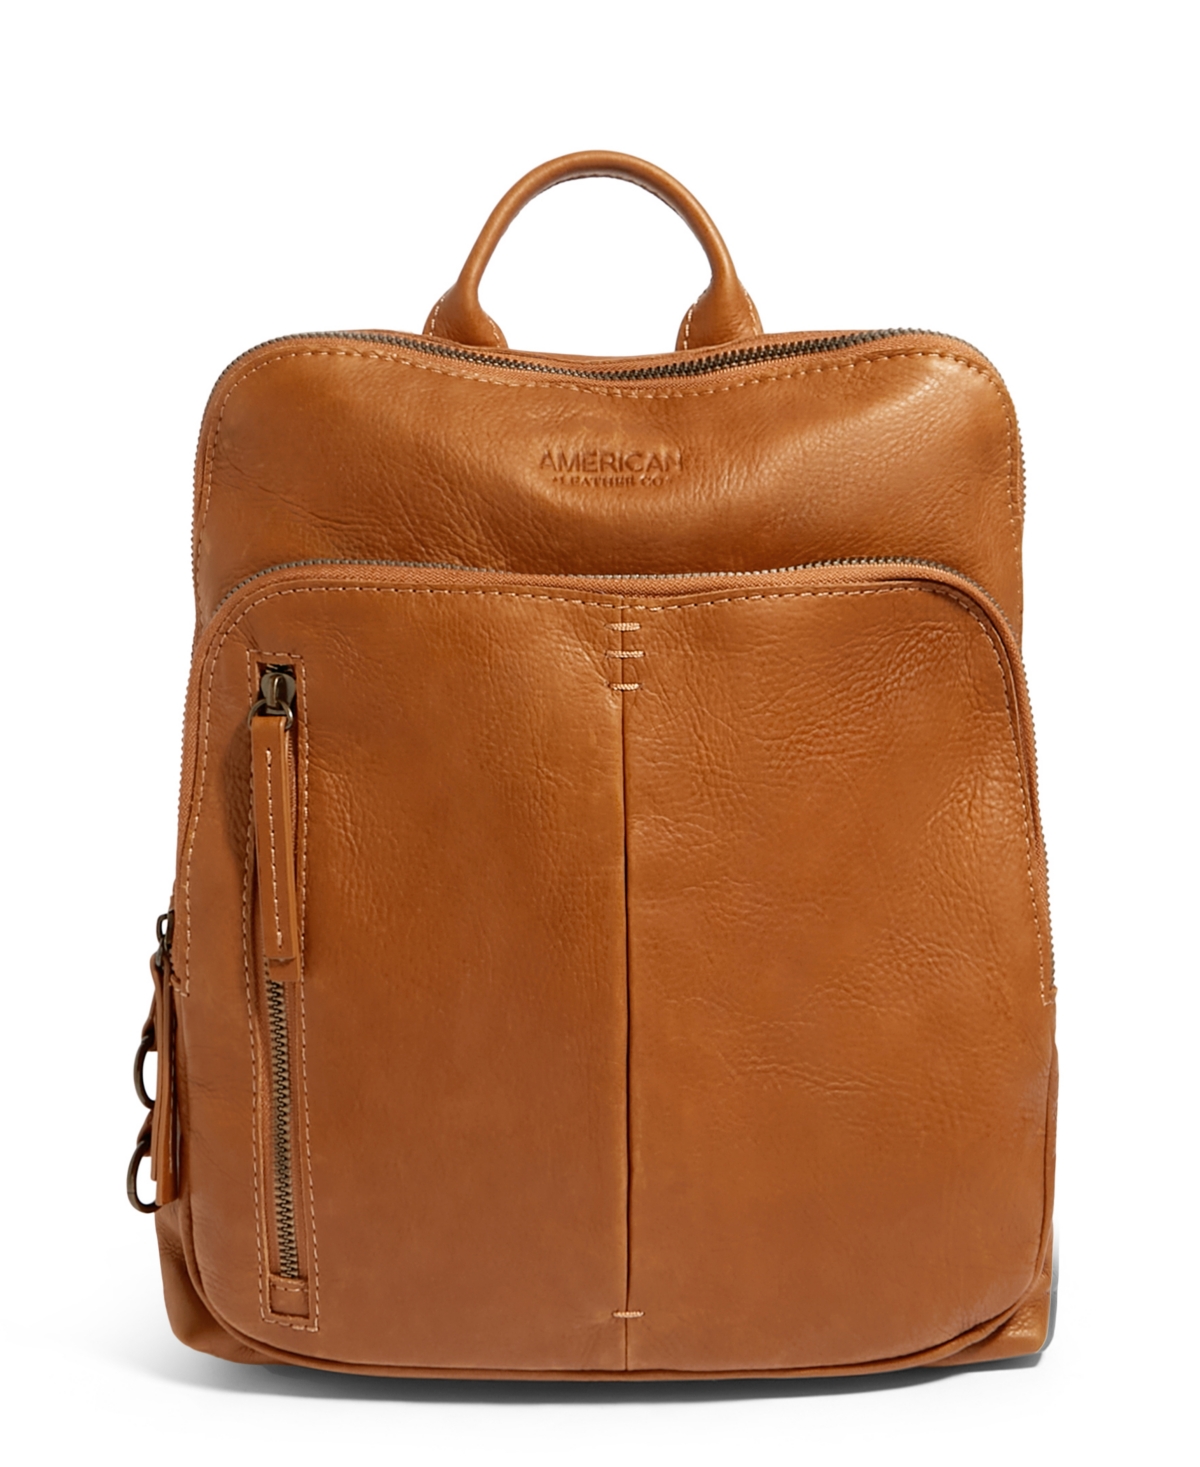 American Leather Co. Cleveland Backpack In Cafe Latte Smooth